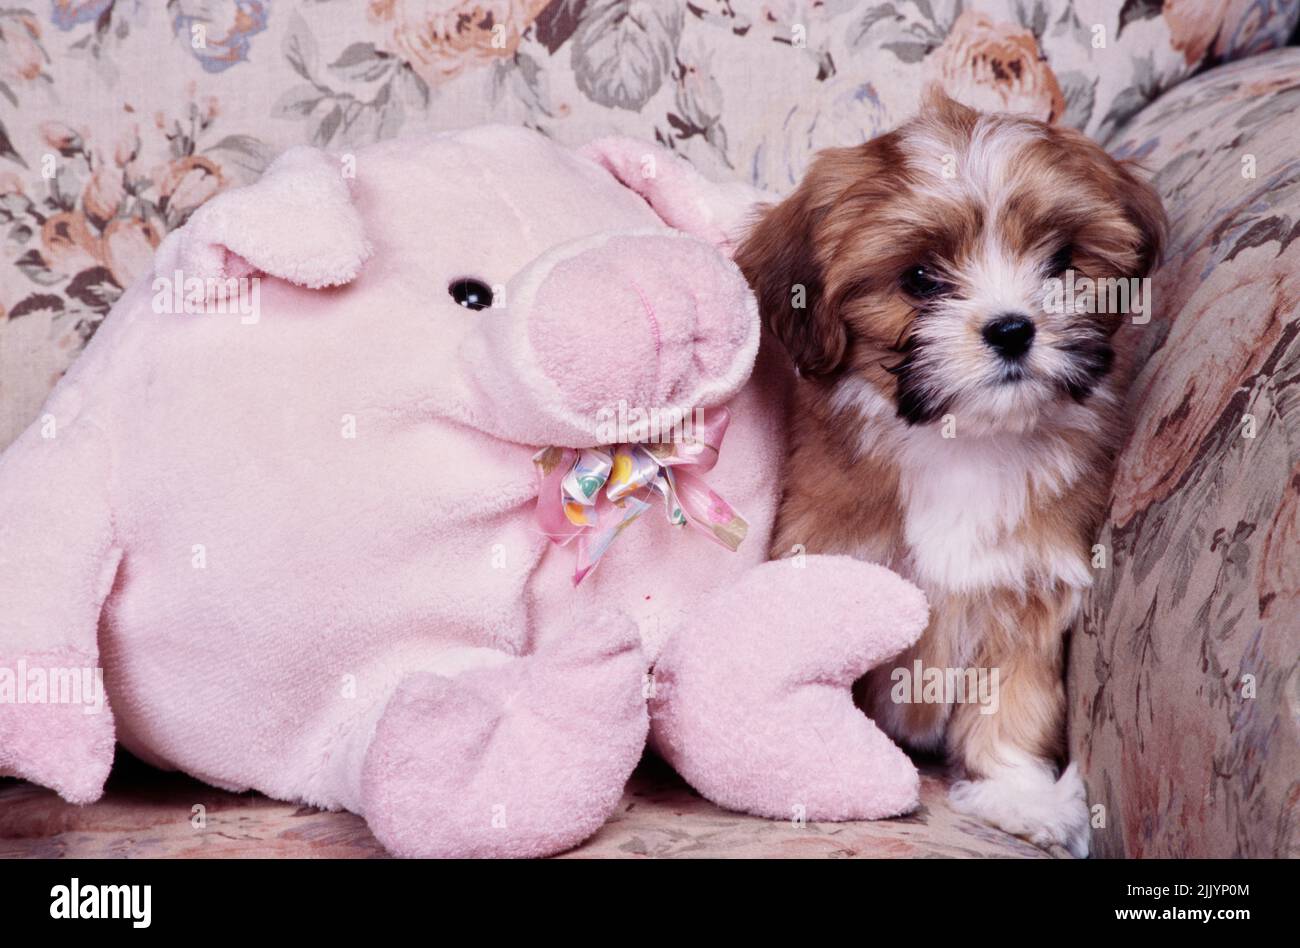 A Lhasa apso puppy on a couch with a pink stuffed toy Stock Photo